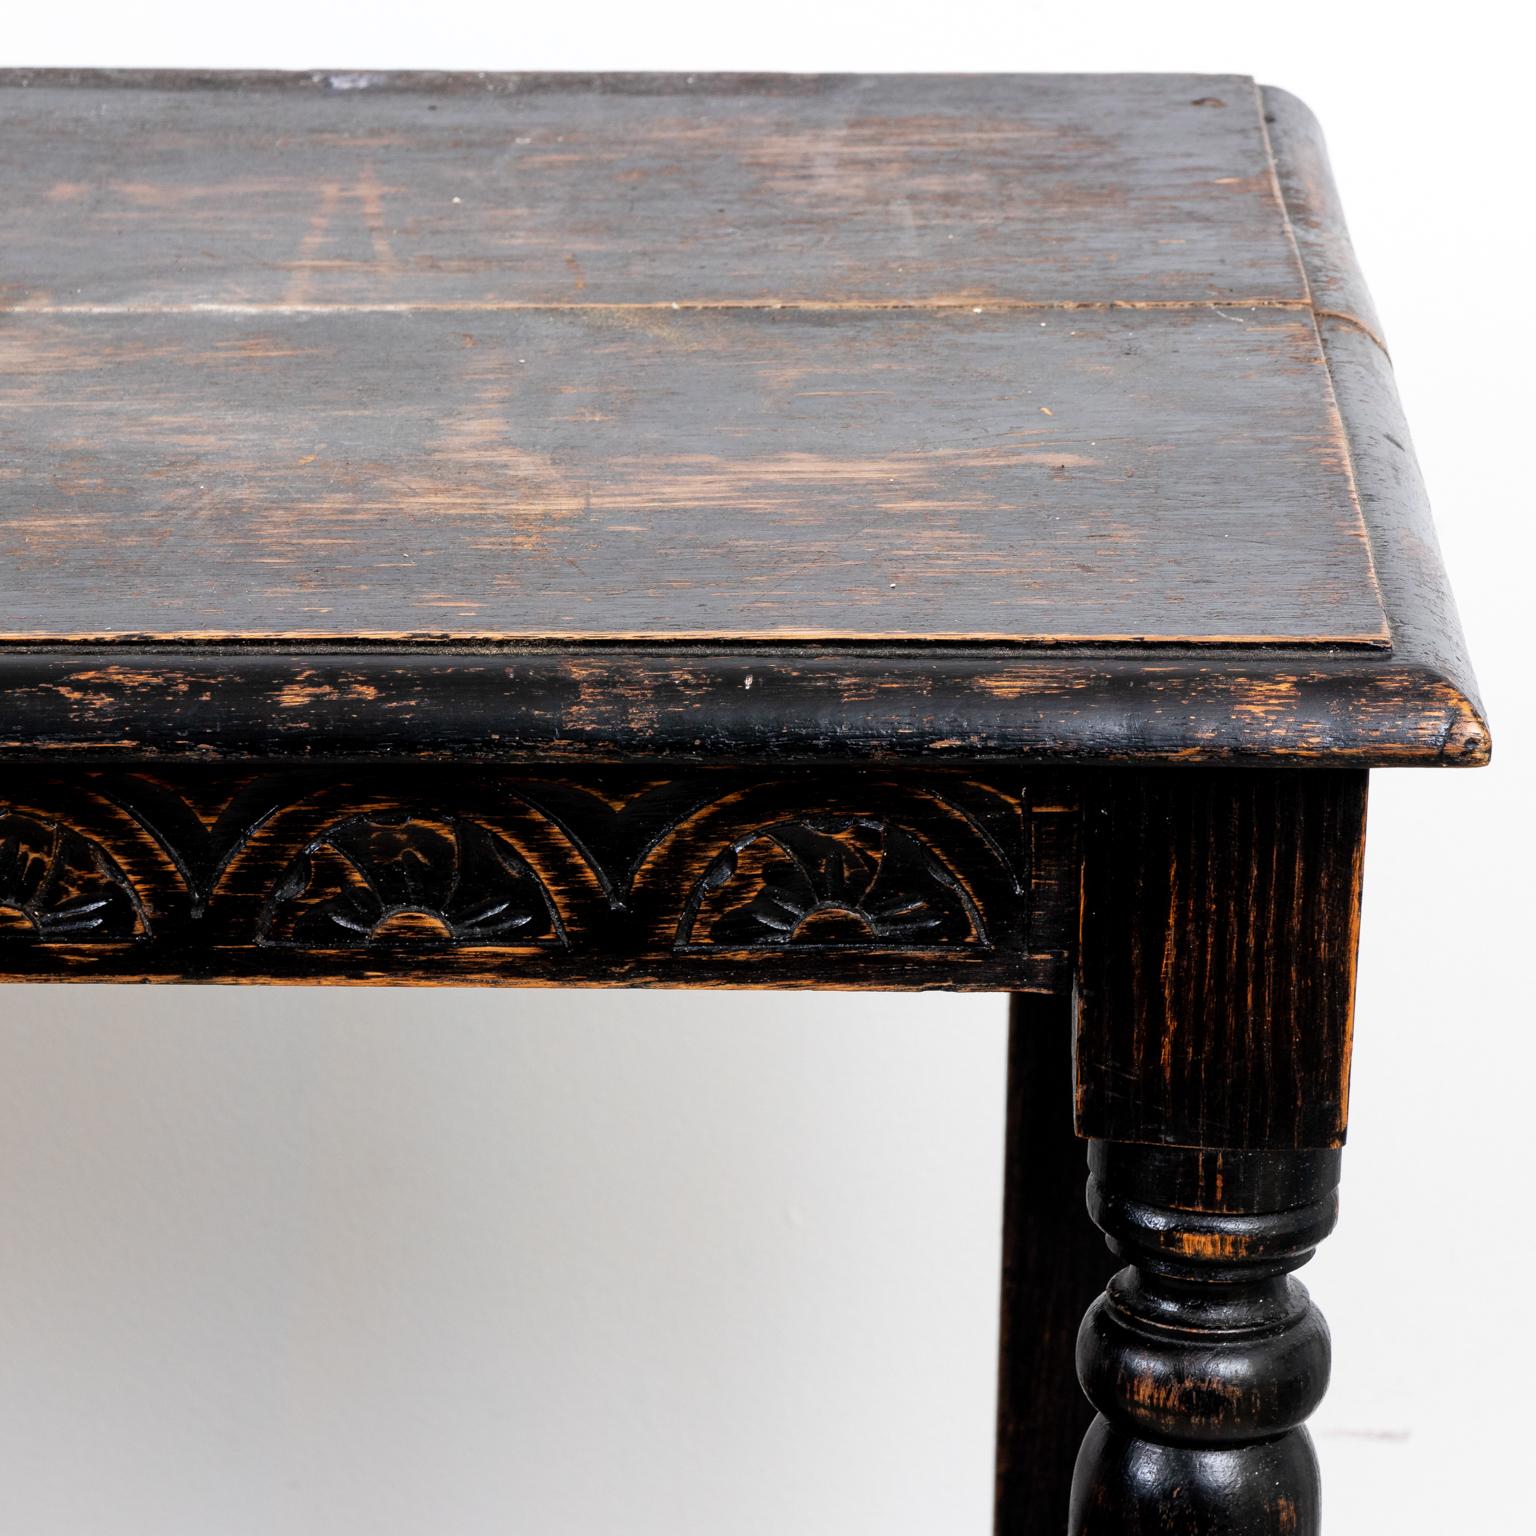 Circa late 19th century English ebonized oakwood three tier server table with vase-and-ring turned legs. Made in England. Please note of wear consistent with age.